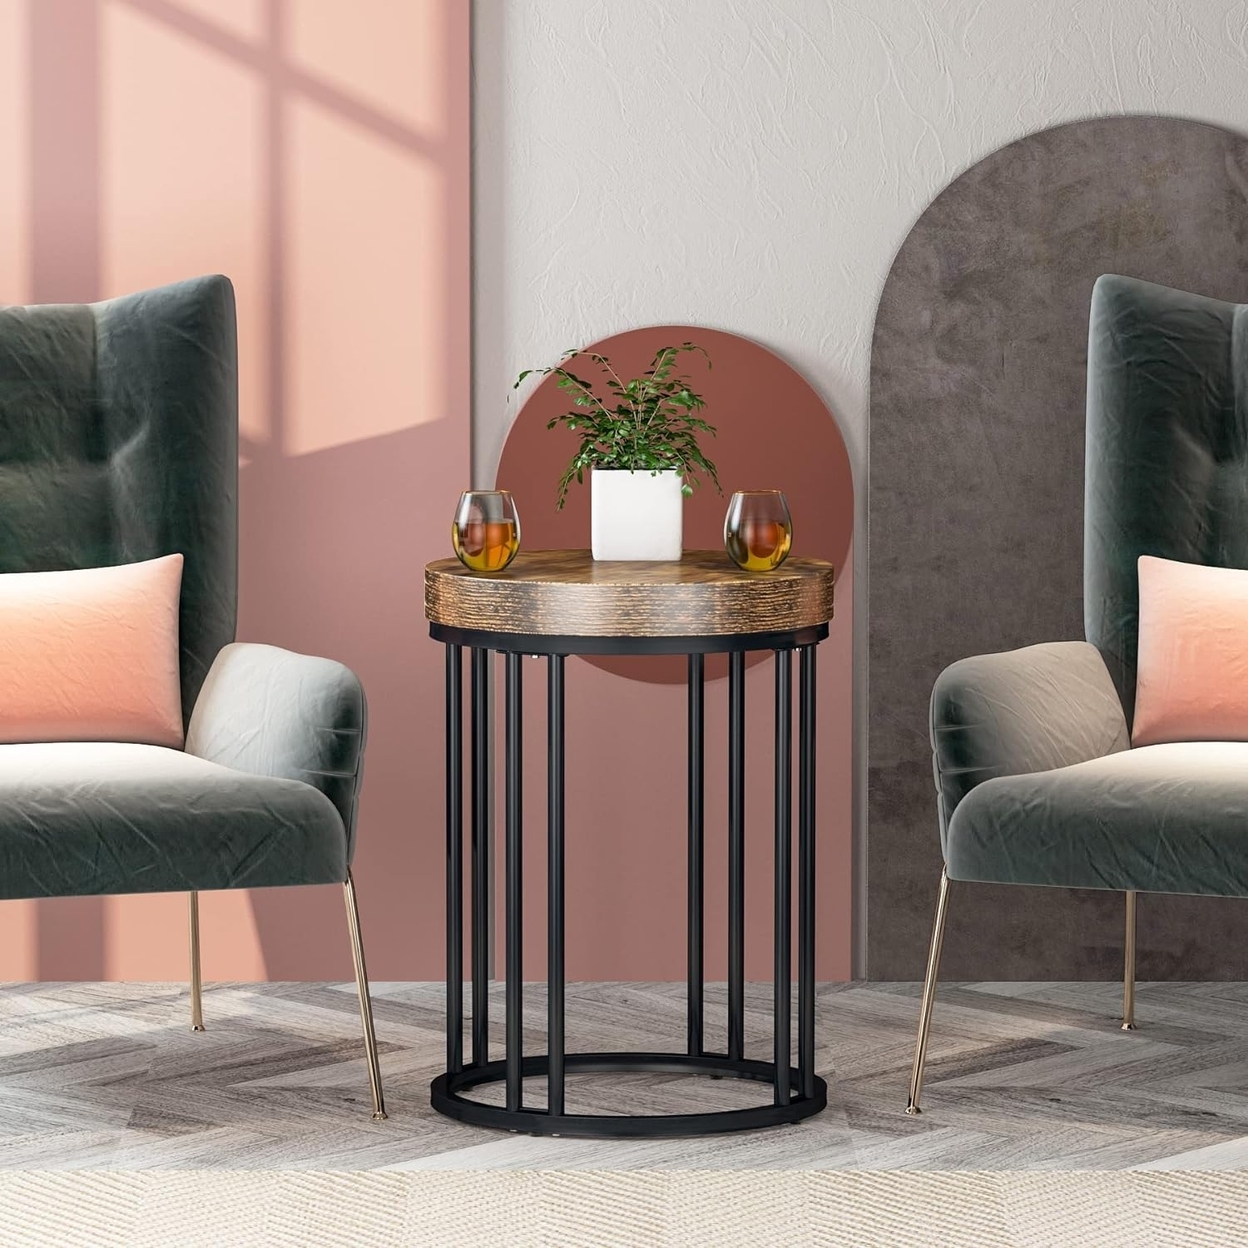 Round End Table, Modern Side Small Accent Nightstand With Metal Frame, Wooden Circle C Bedside